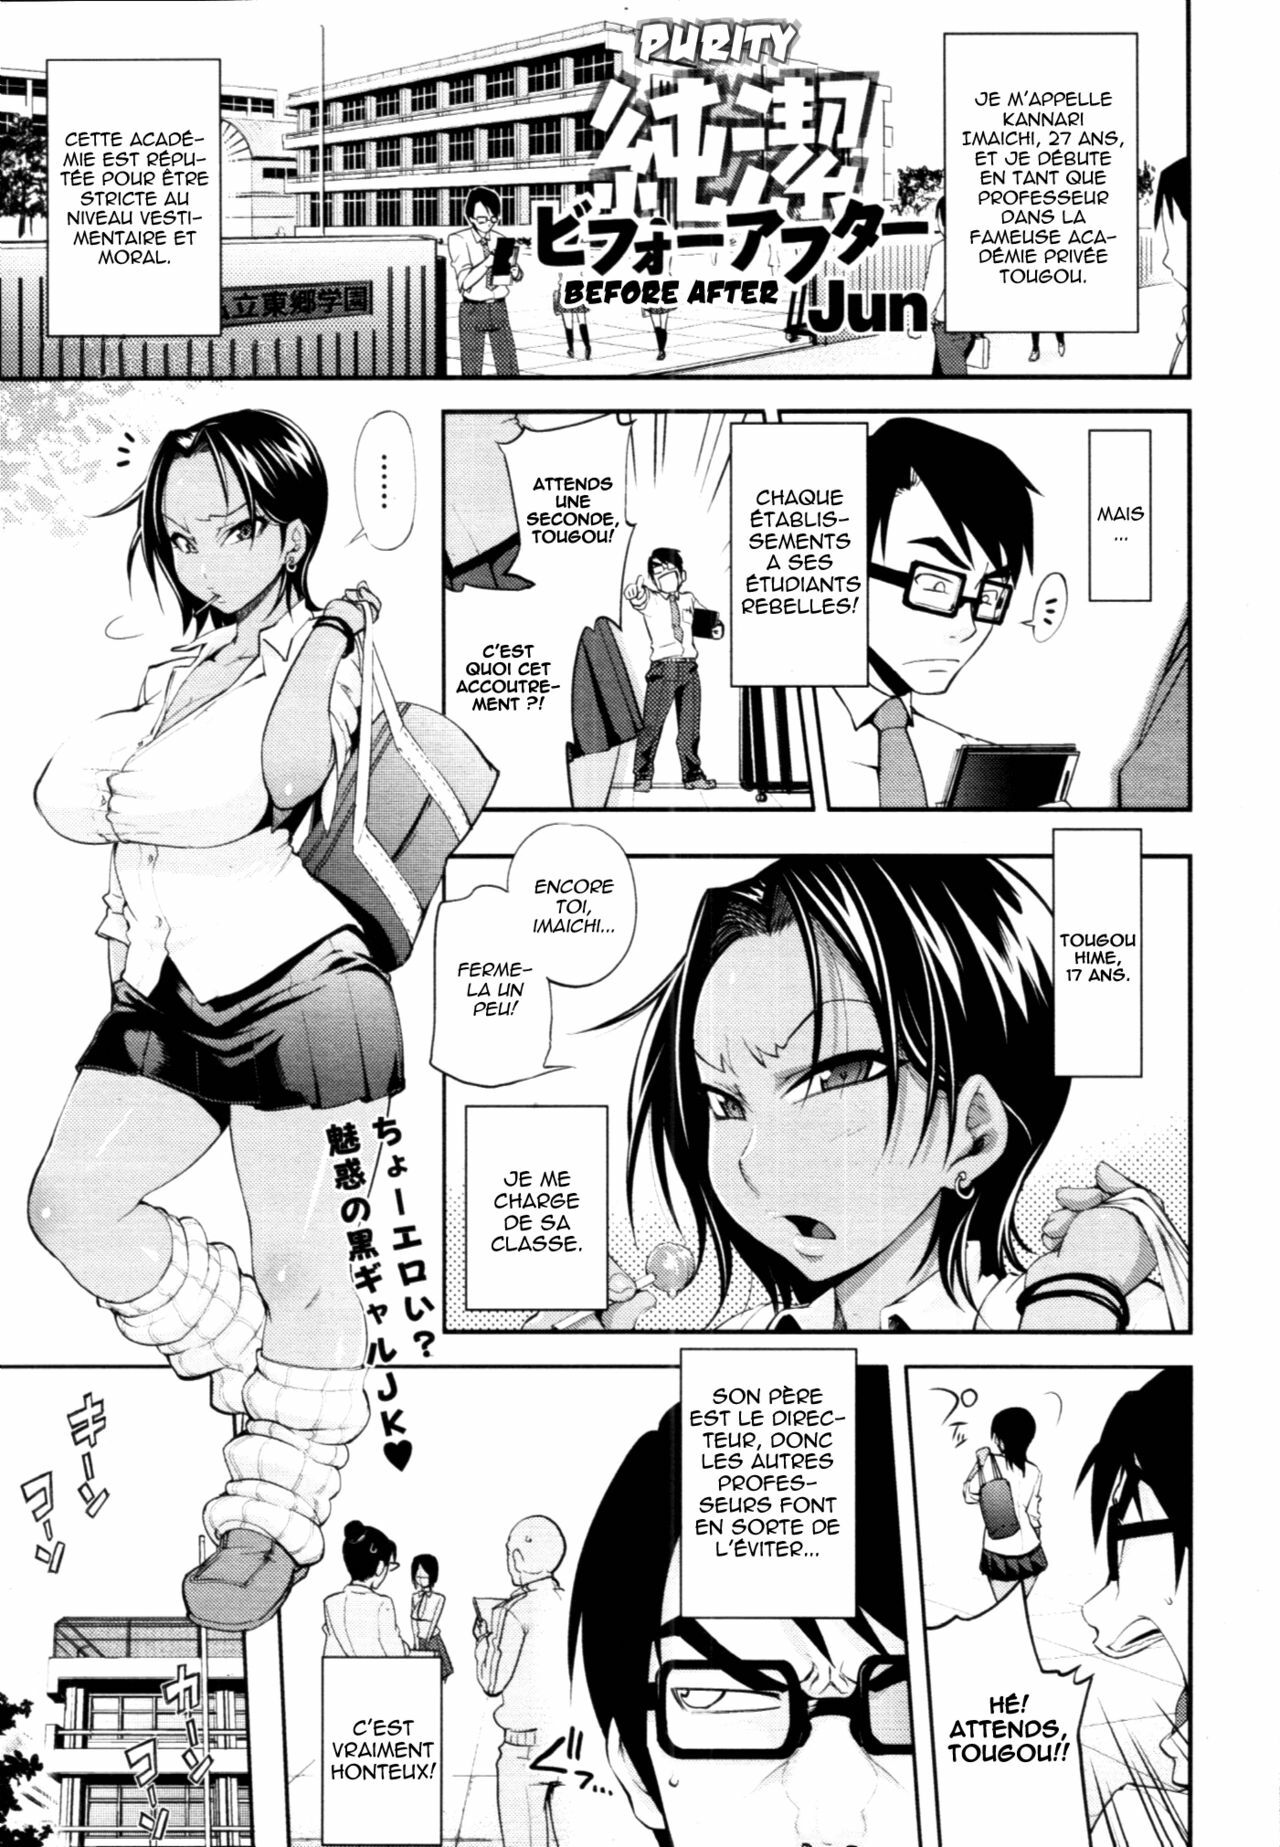 [Jun] Junketsu Before After | Purity Before After (COMIC Tenma 2010-07) [French] [Cejix & Kerios] page 1 full